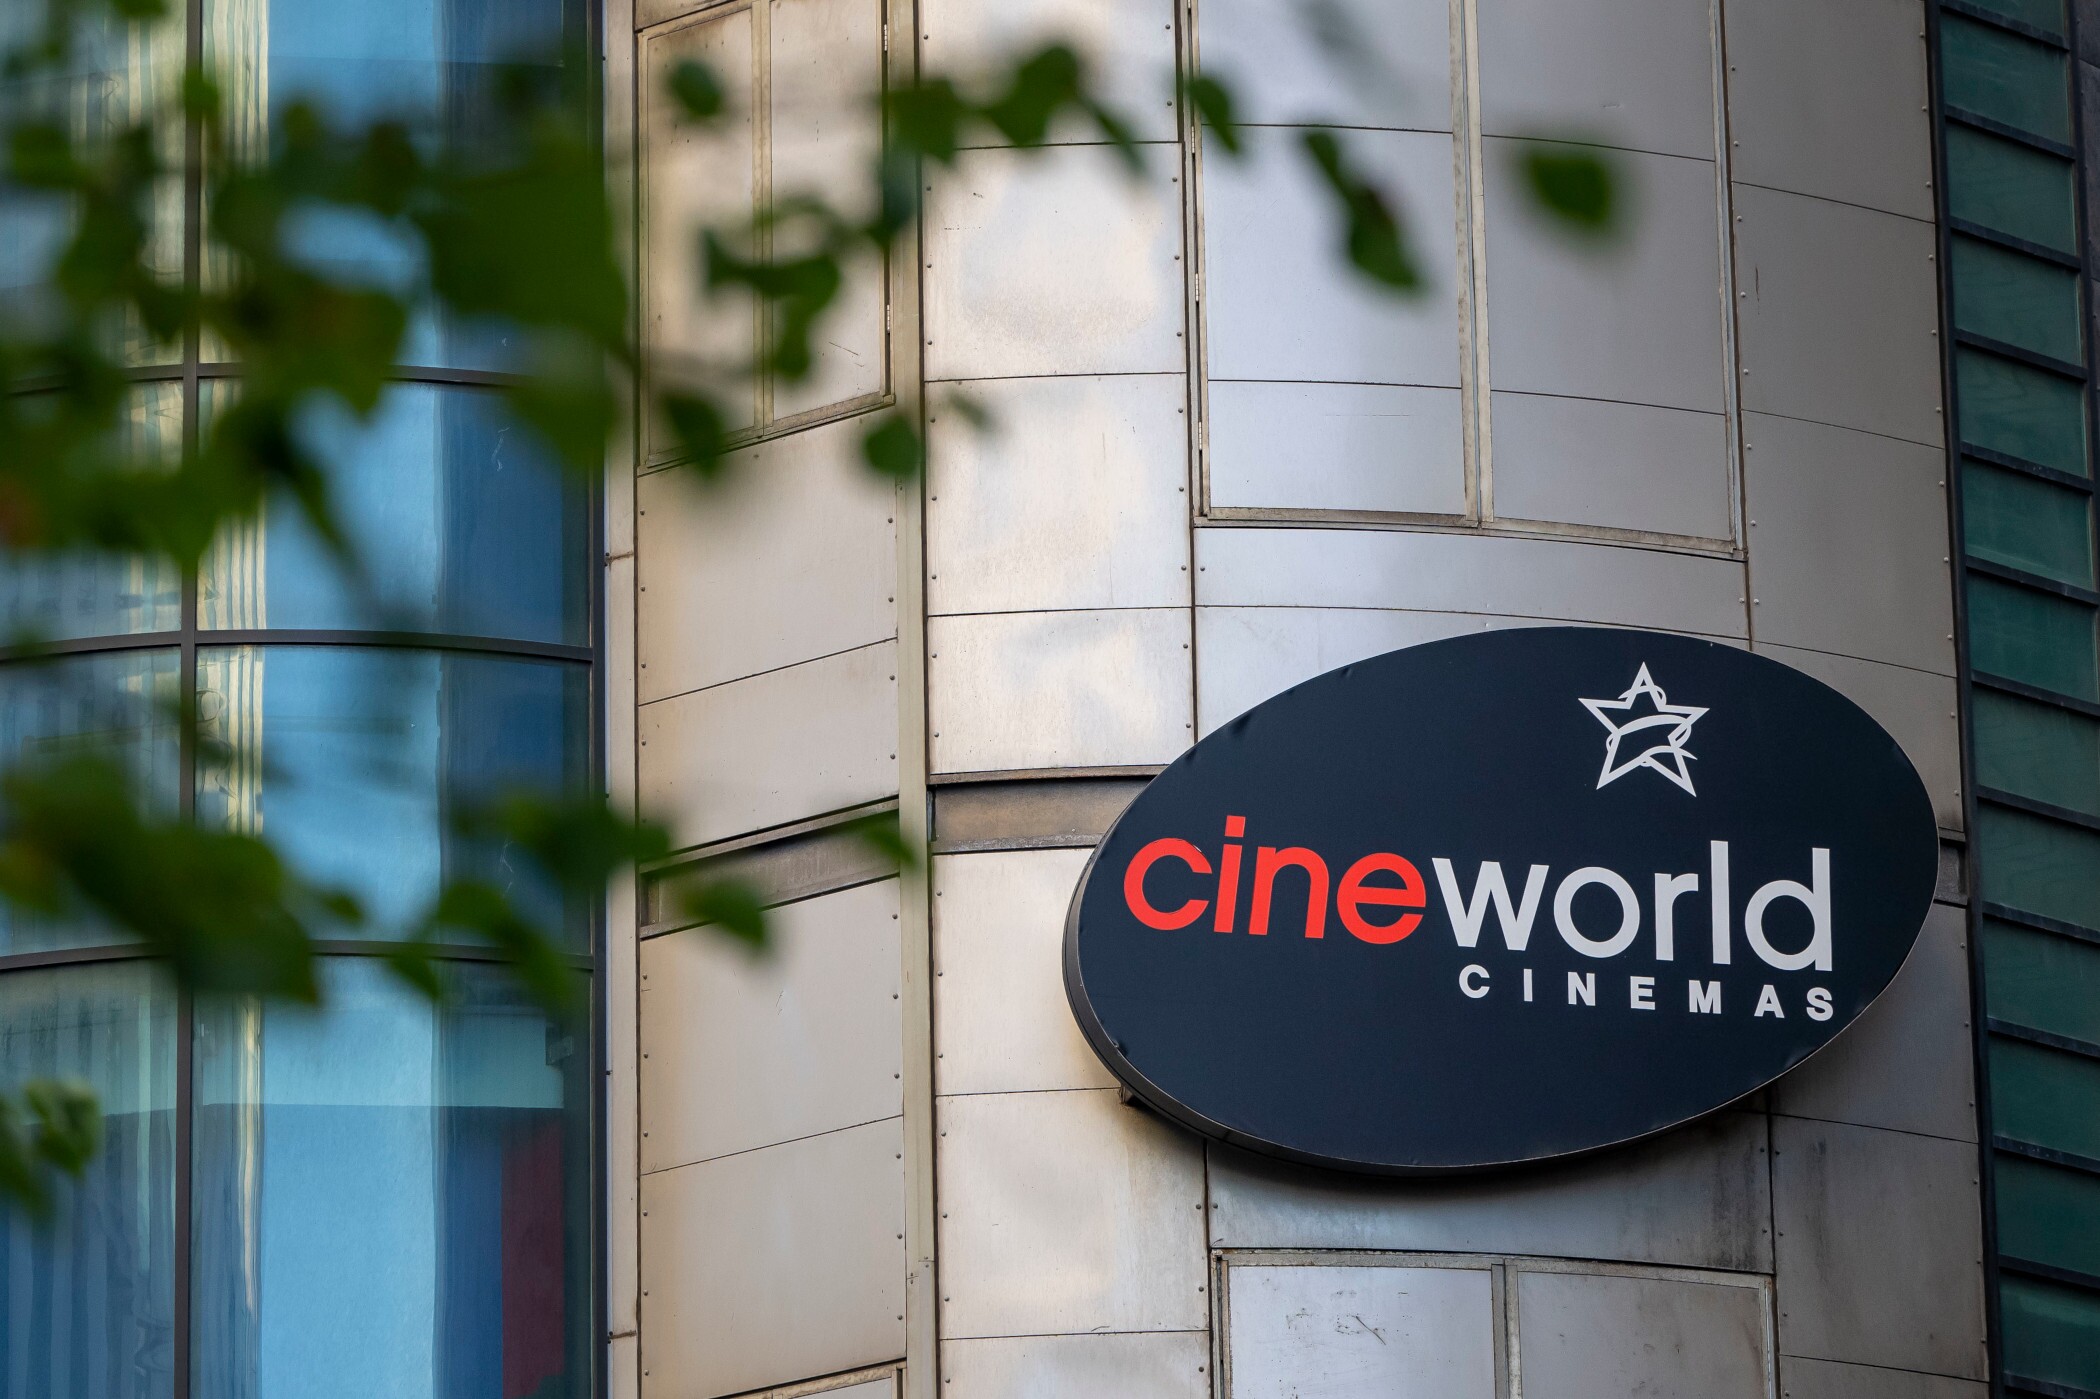 A Cineworld Cinemas sign in the United Kingdom. The cinema chain is working its way through Chapter 11 bankruptcy proceedings in Texas. (Getty Images)